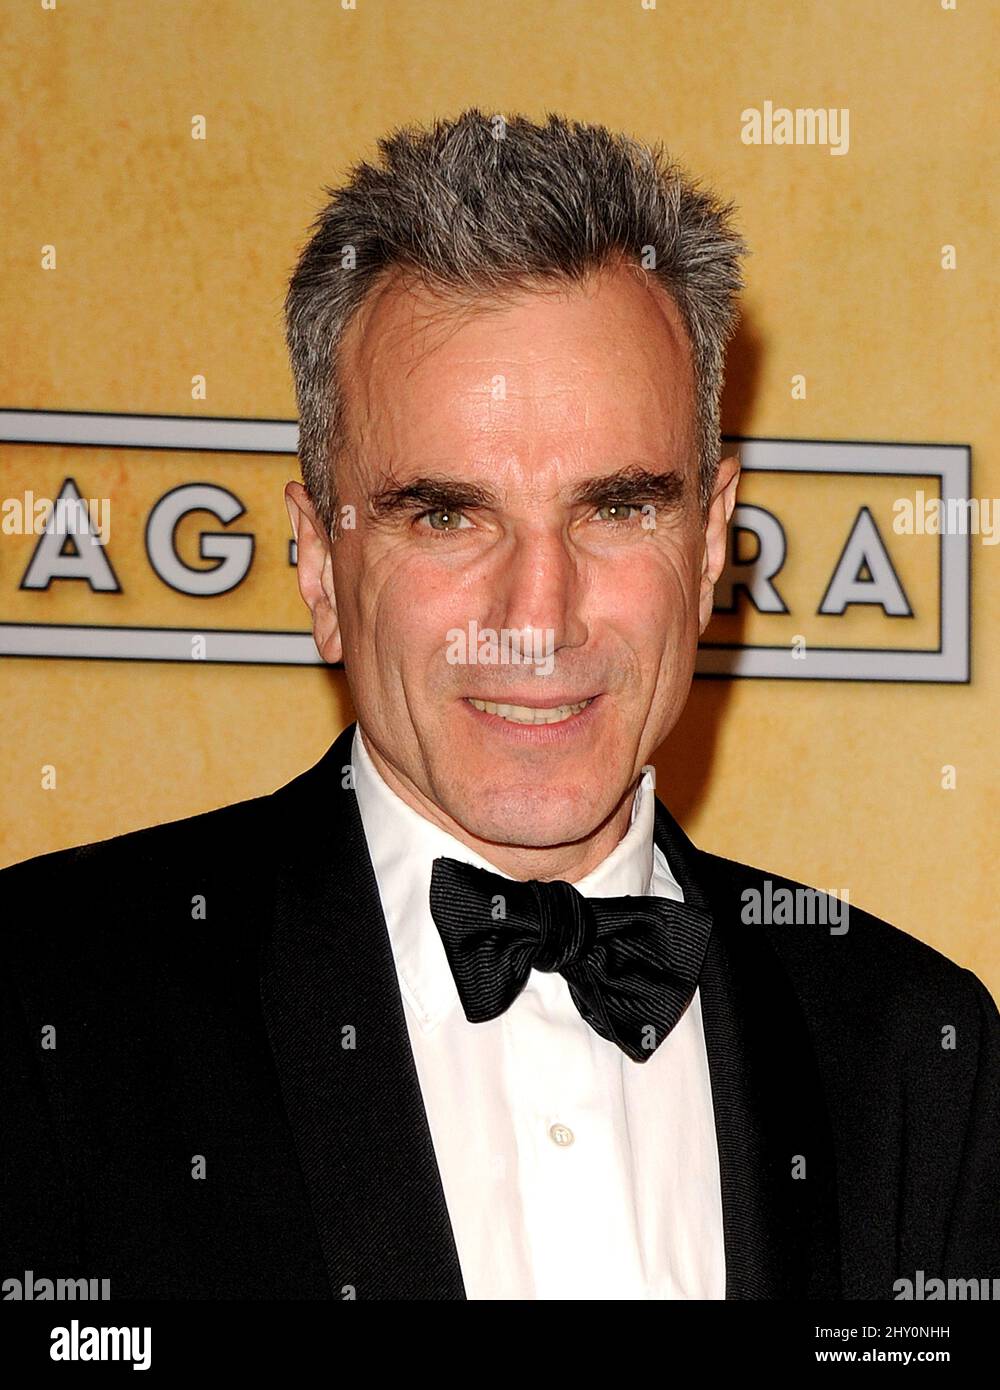 Actor Daniel Day-Lewis poses backstage with the award for best male actor in a leading role at the 19th Annual Screen Actors Guild Awards Stock Photo